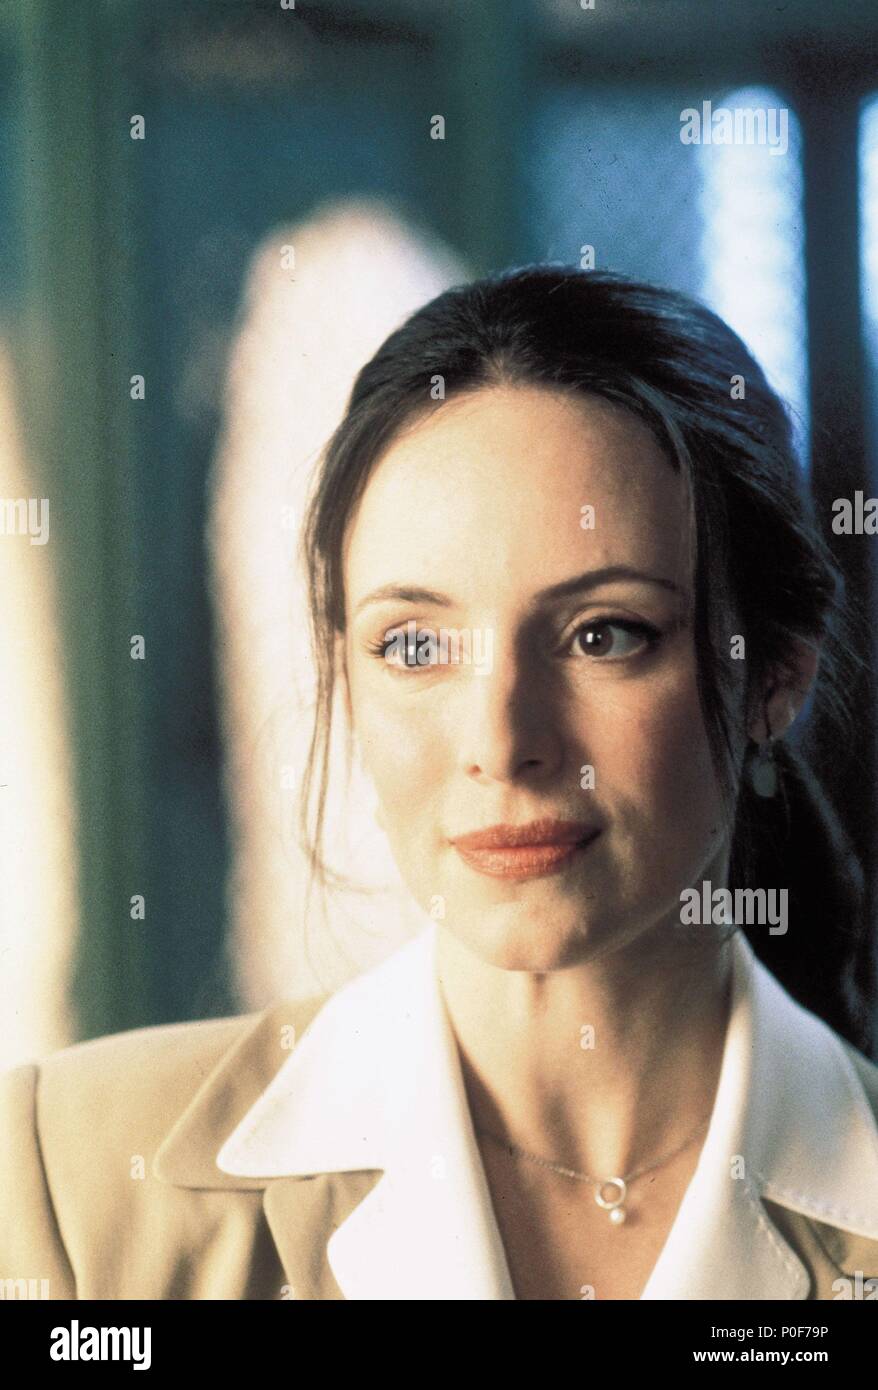 Original Film Title: THE GENERAL'S DAUGHTER.  English Title: THE GENERAL'S DAUGHTER.  Film Director: SIMON WEST.  Year: 1999.  Stars: MADELEINE STOWE. Credit: PARAMOUNT PICTURES / FOREMAN, RICHARD / Album Stock Photo